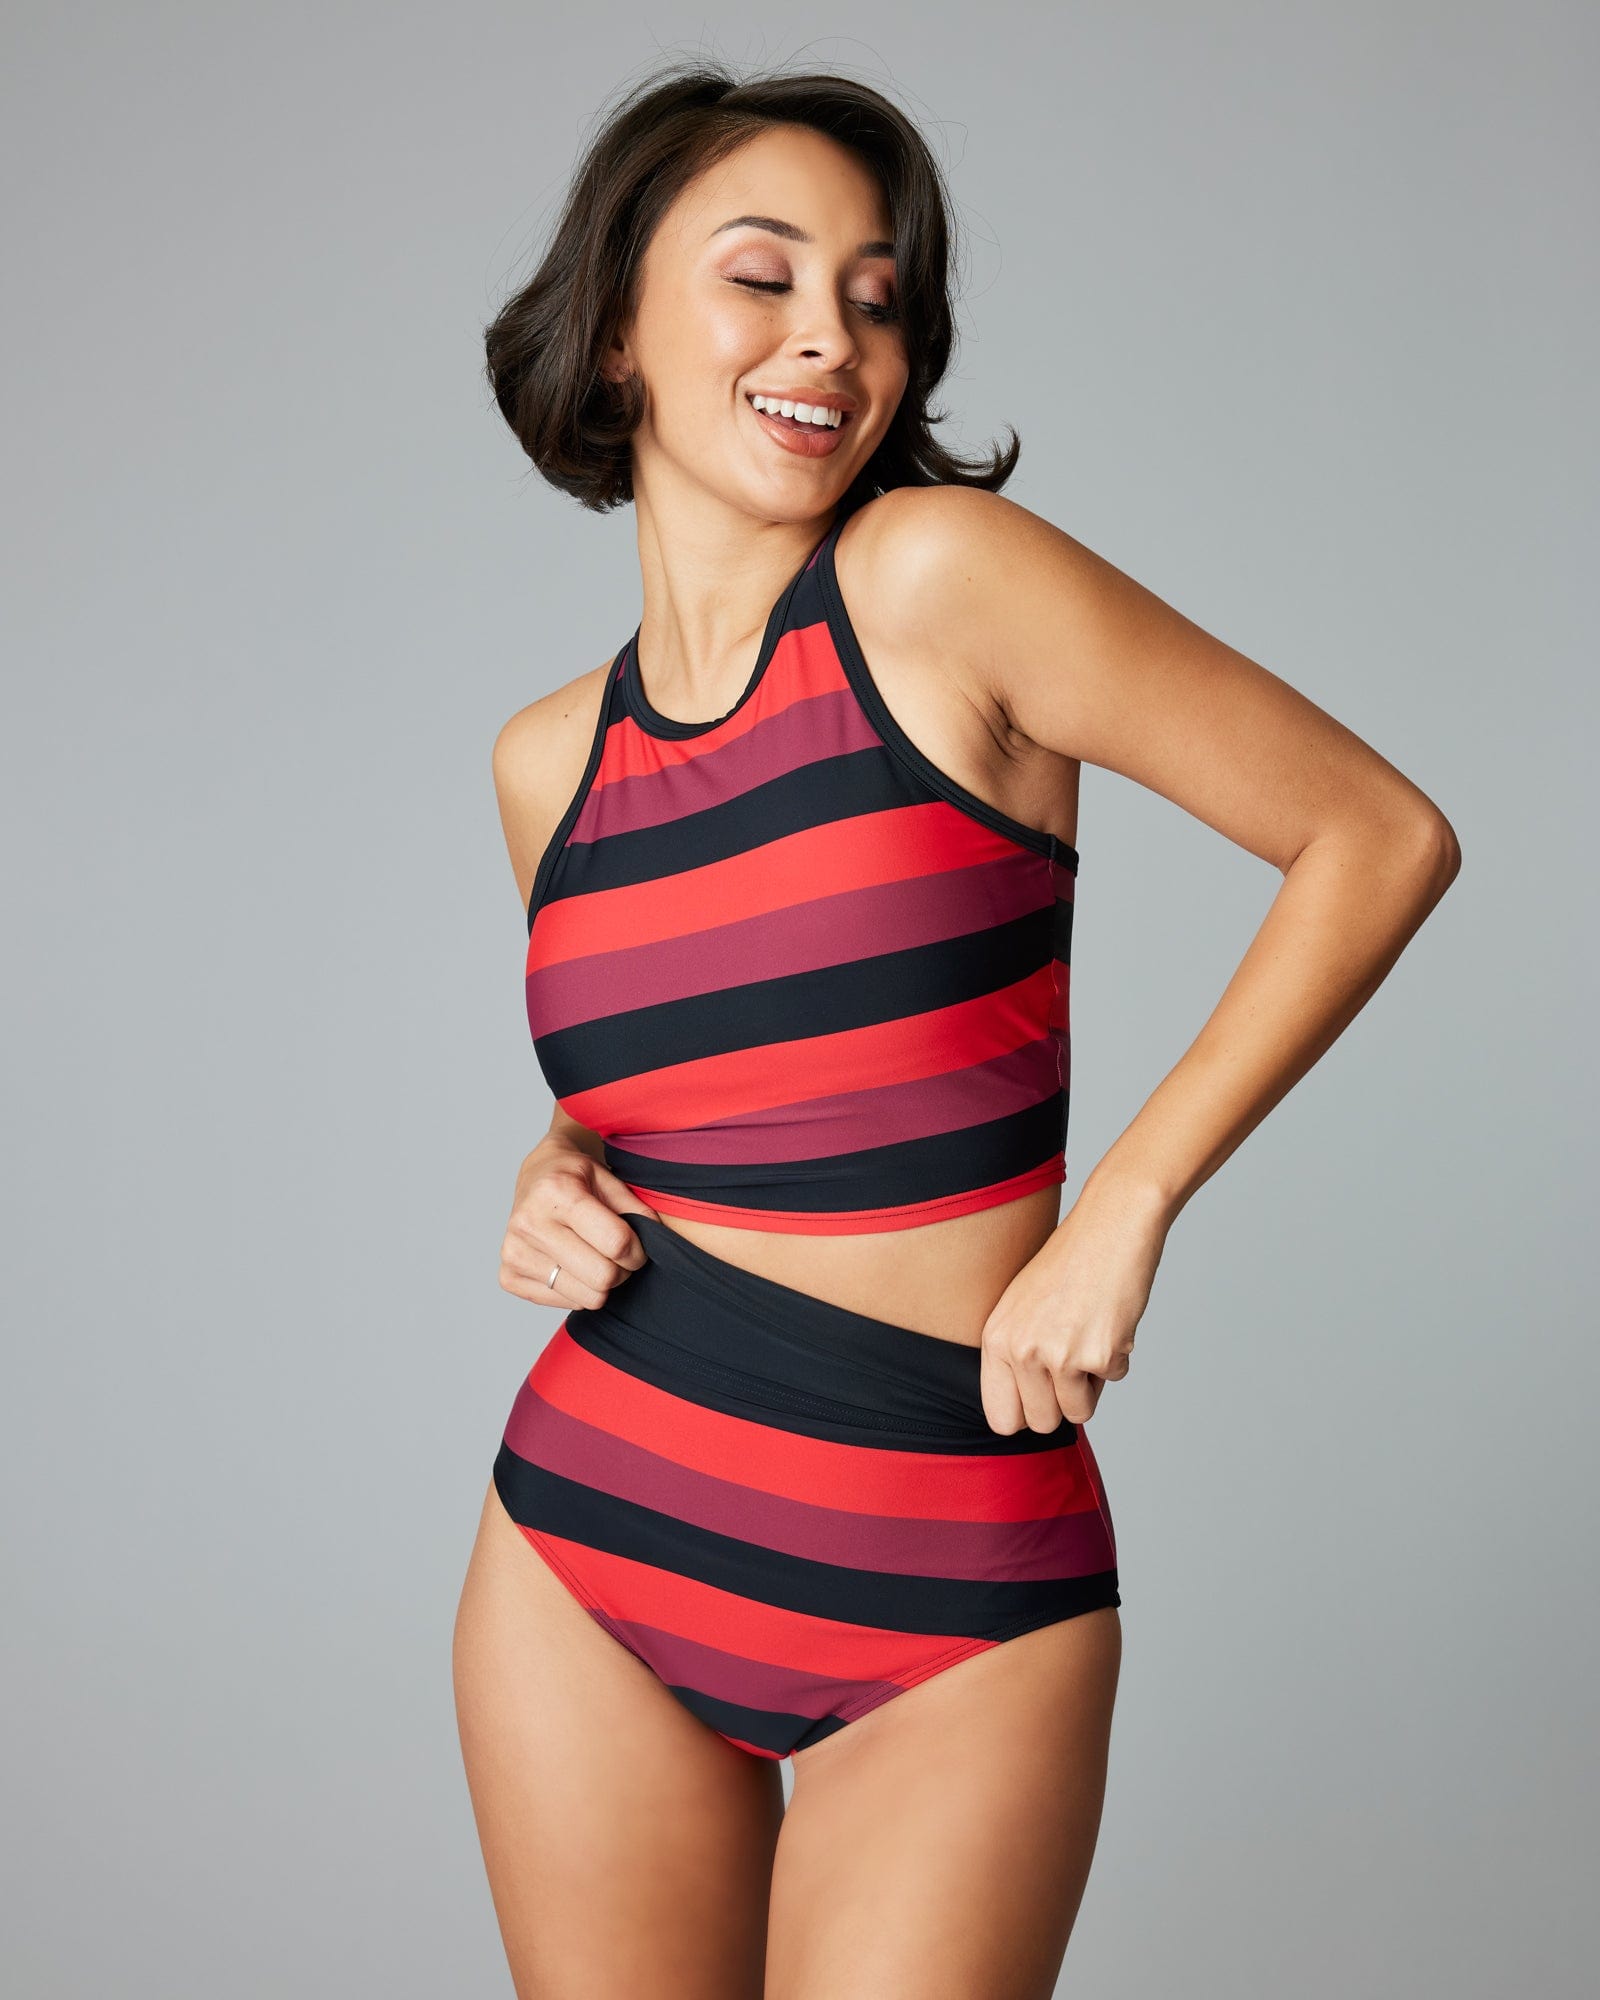 Woman in a two piece swimsuit with a red, black and plum striped crop top.